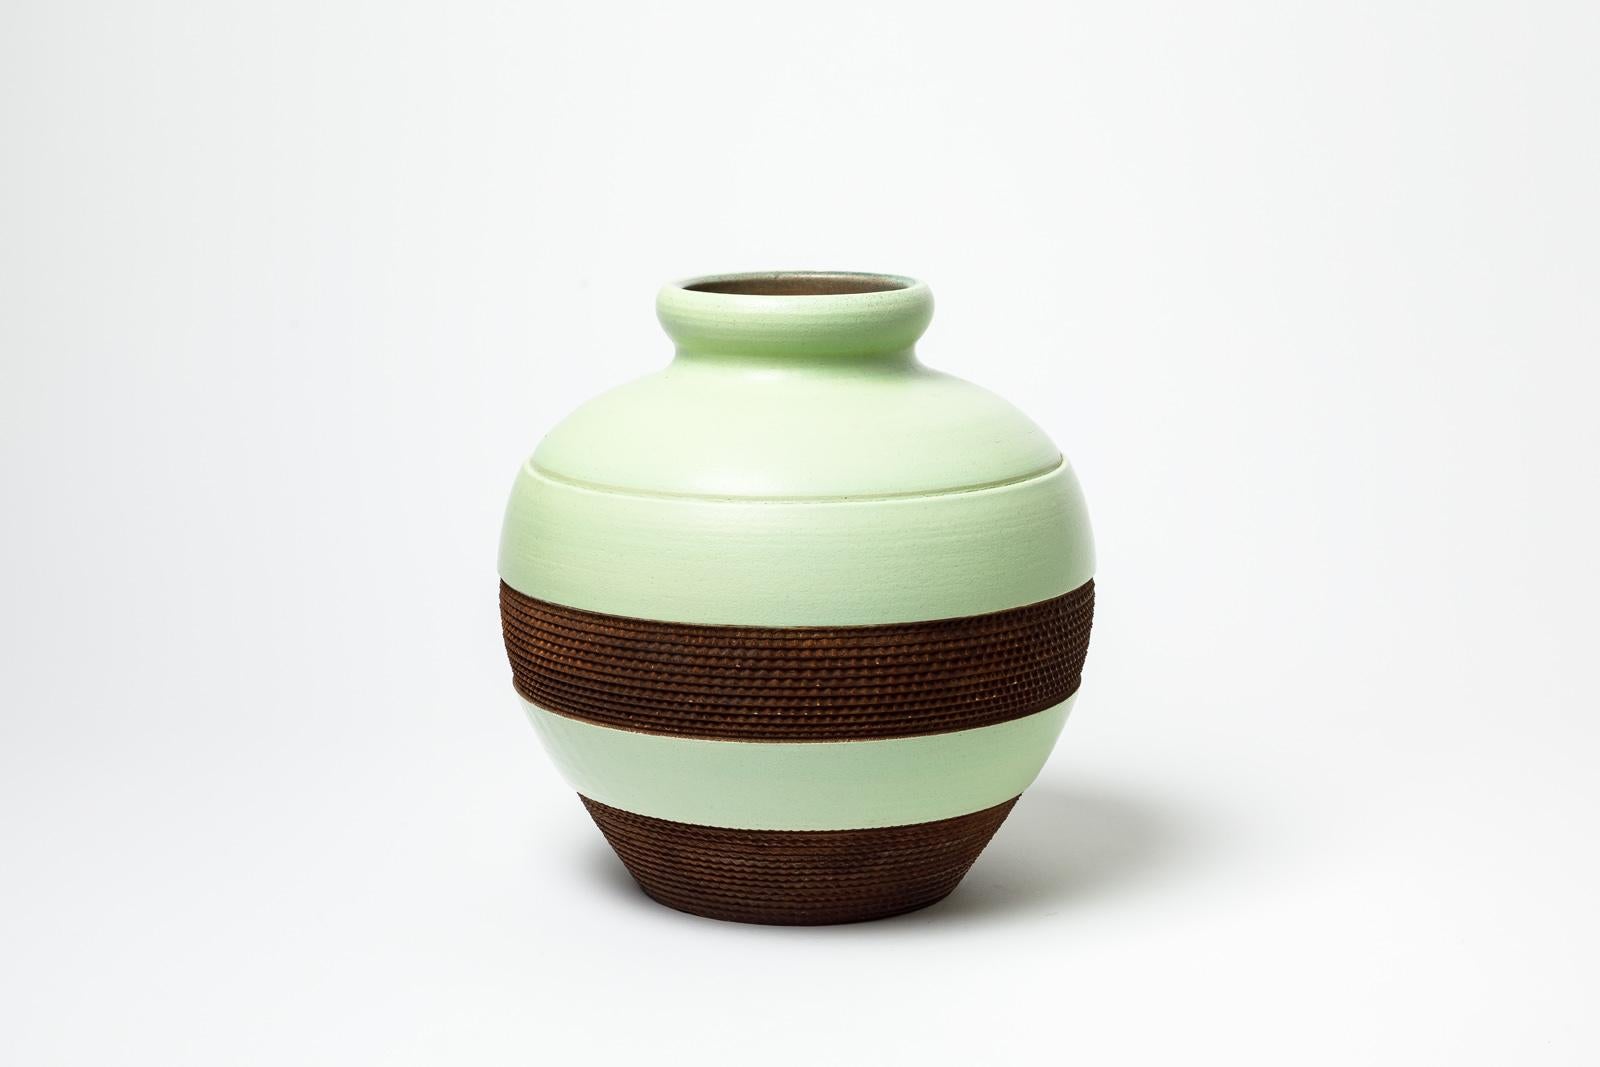 Green and brown glazed stoneware vase by Pol Chambost.
Artist signature under the base. Circa 1930.
H : 13.4’ x 9.4’ inches.
